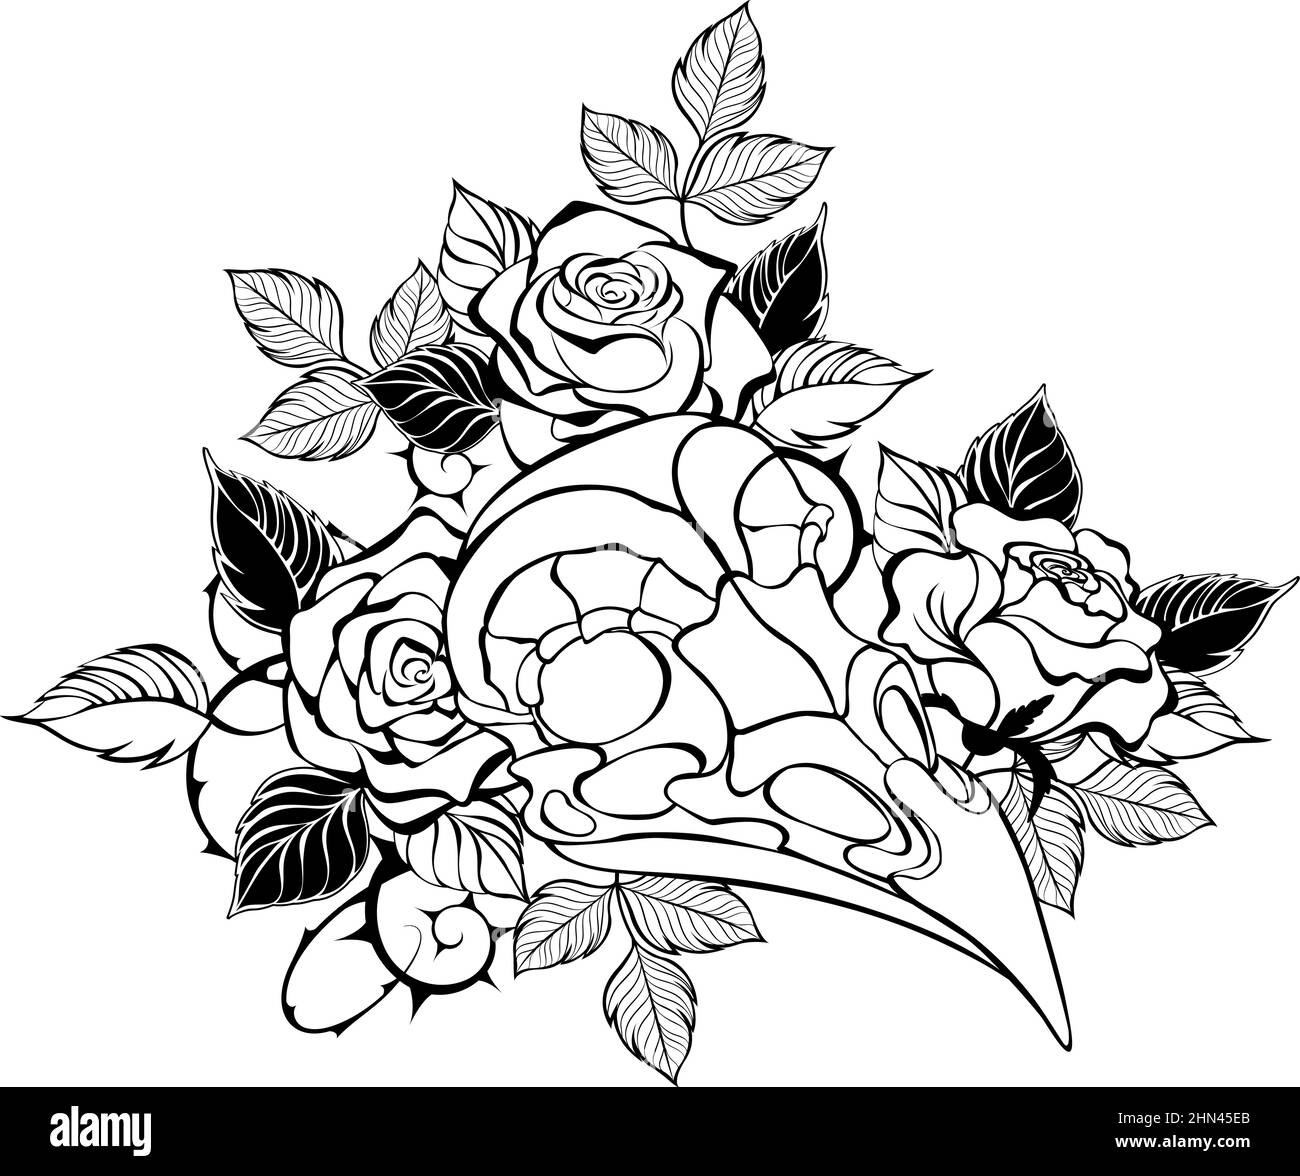 Artistically painted, Gothic, bird skull decorated with contoured, blooming roses with black leaves and stems on white background. Gothic style. Stock Vector